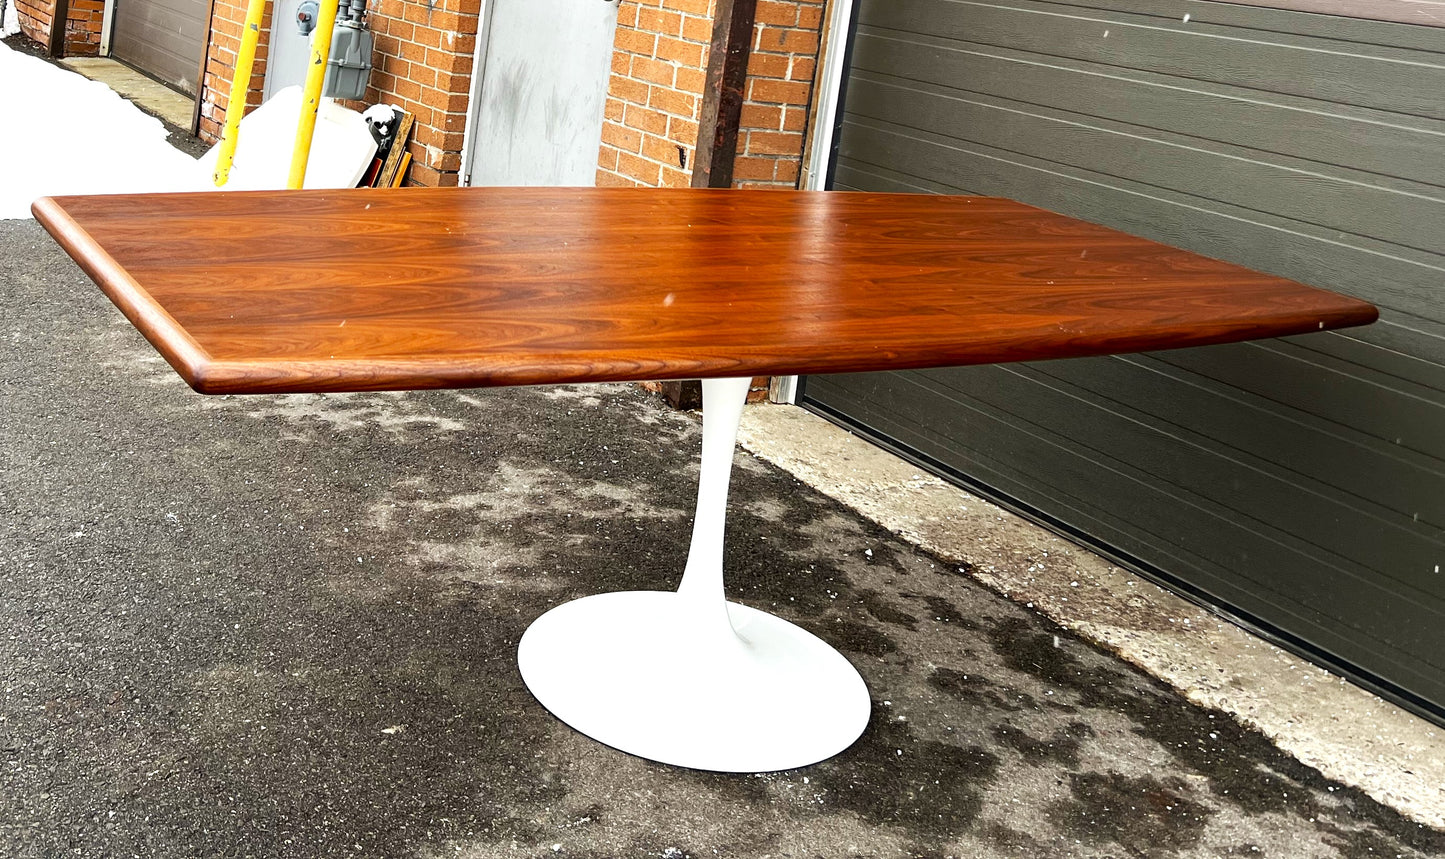 REFINISHED Mid Century Modern Rosewood Dining Table with Tulip Base 84"